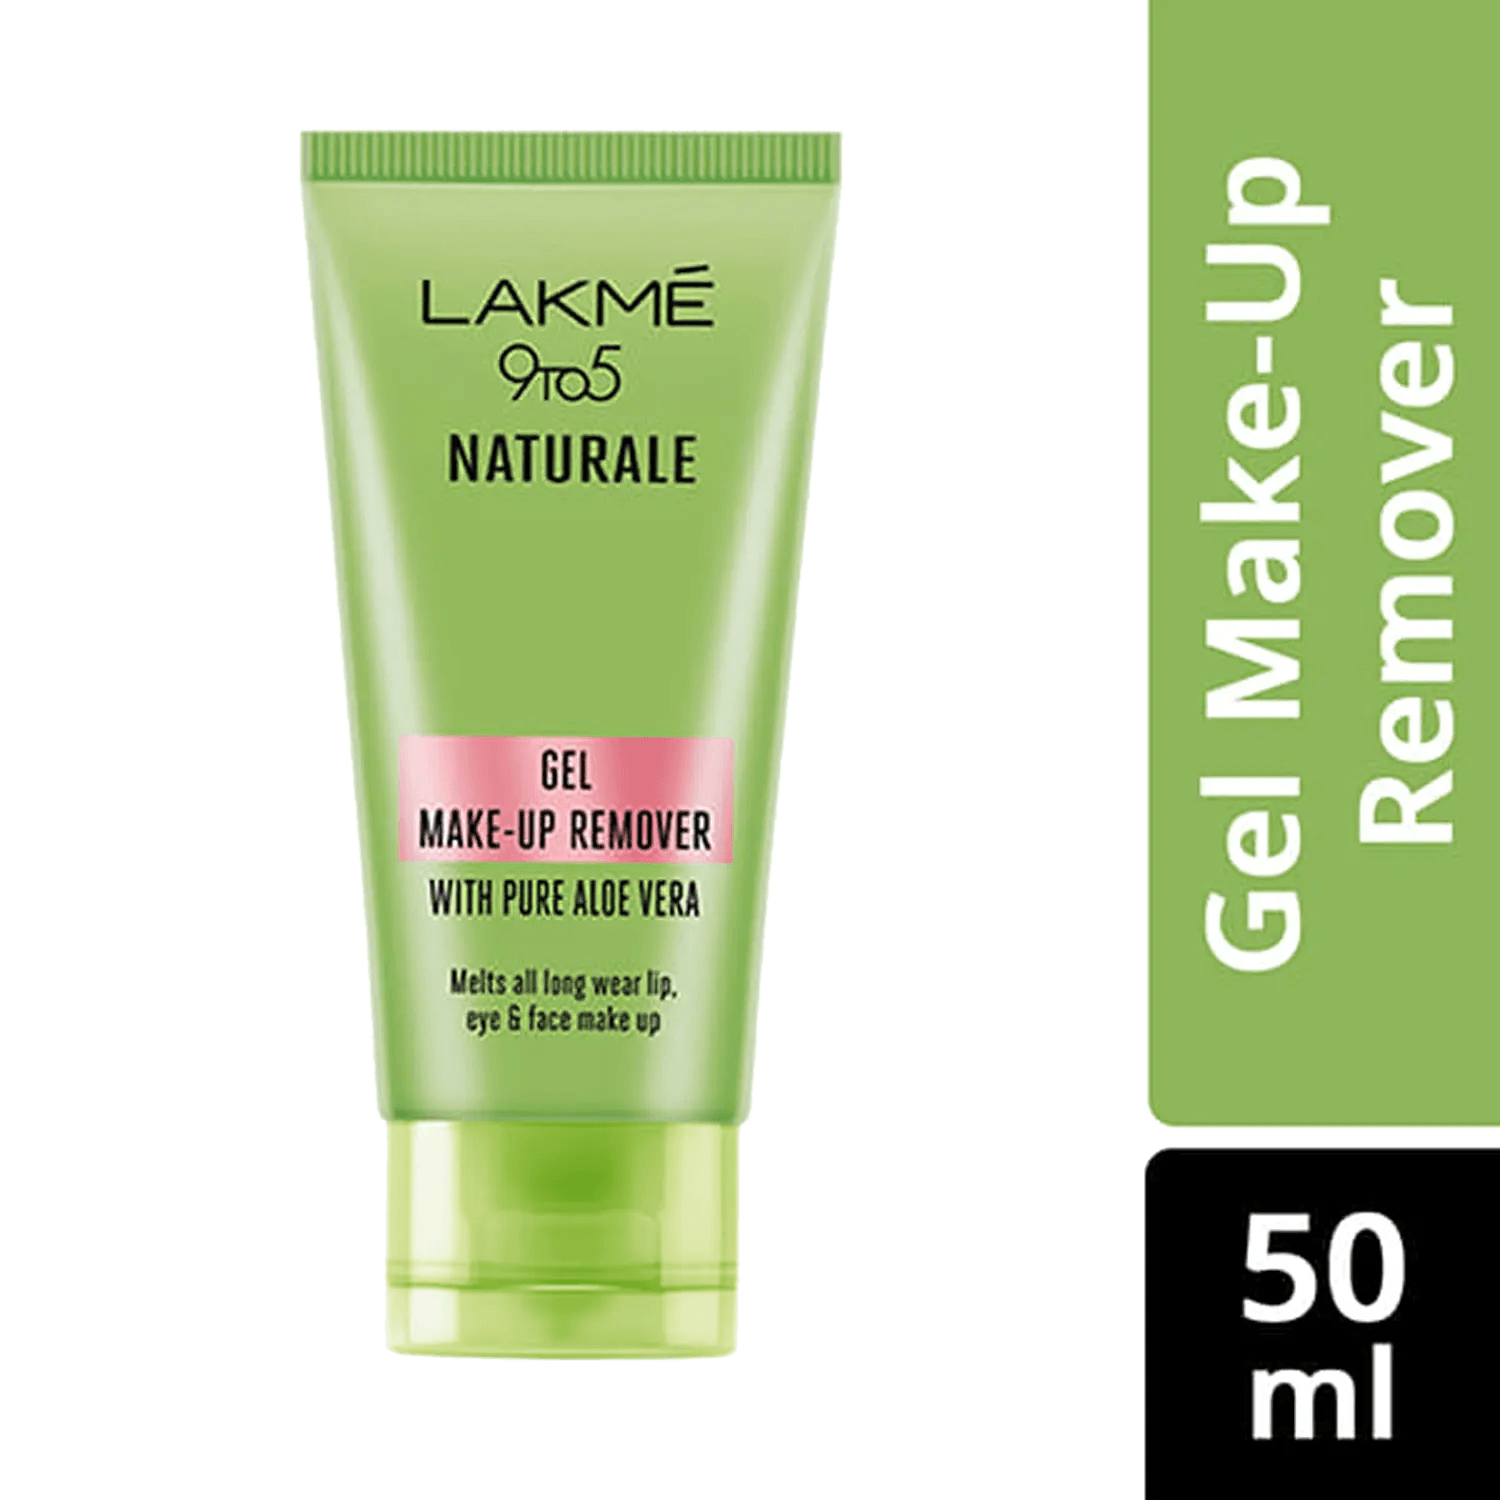 Lakme | Lakme 9 To 5 Natural Gel Makeup Remover with Pure Aloe Vera (50ml)